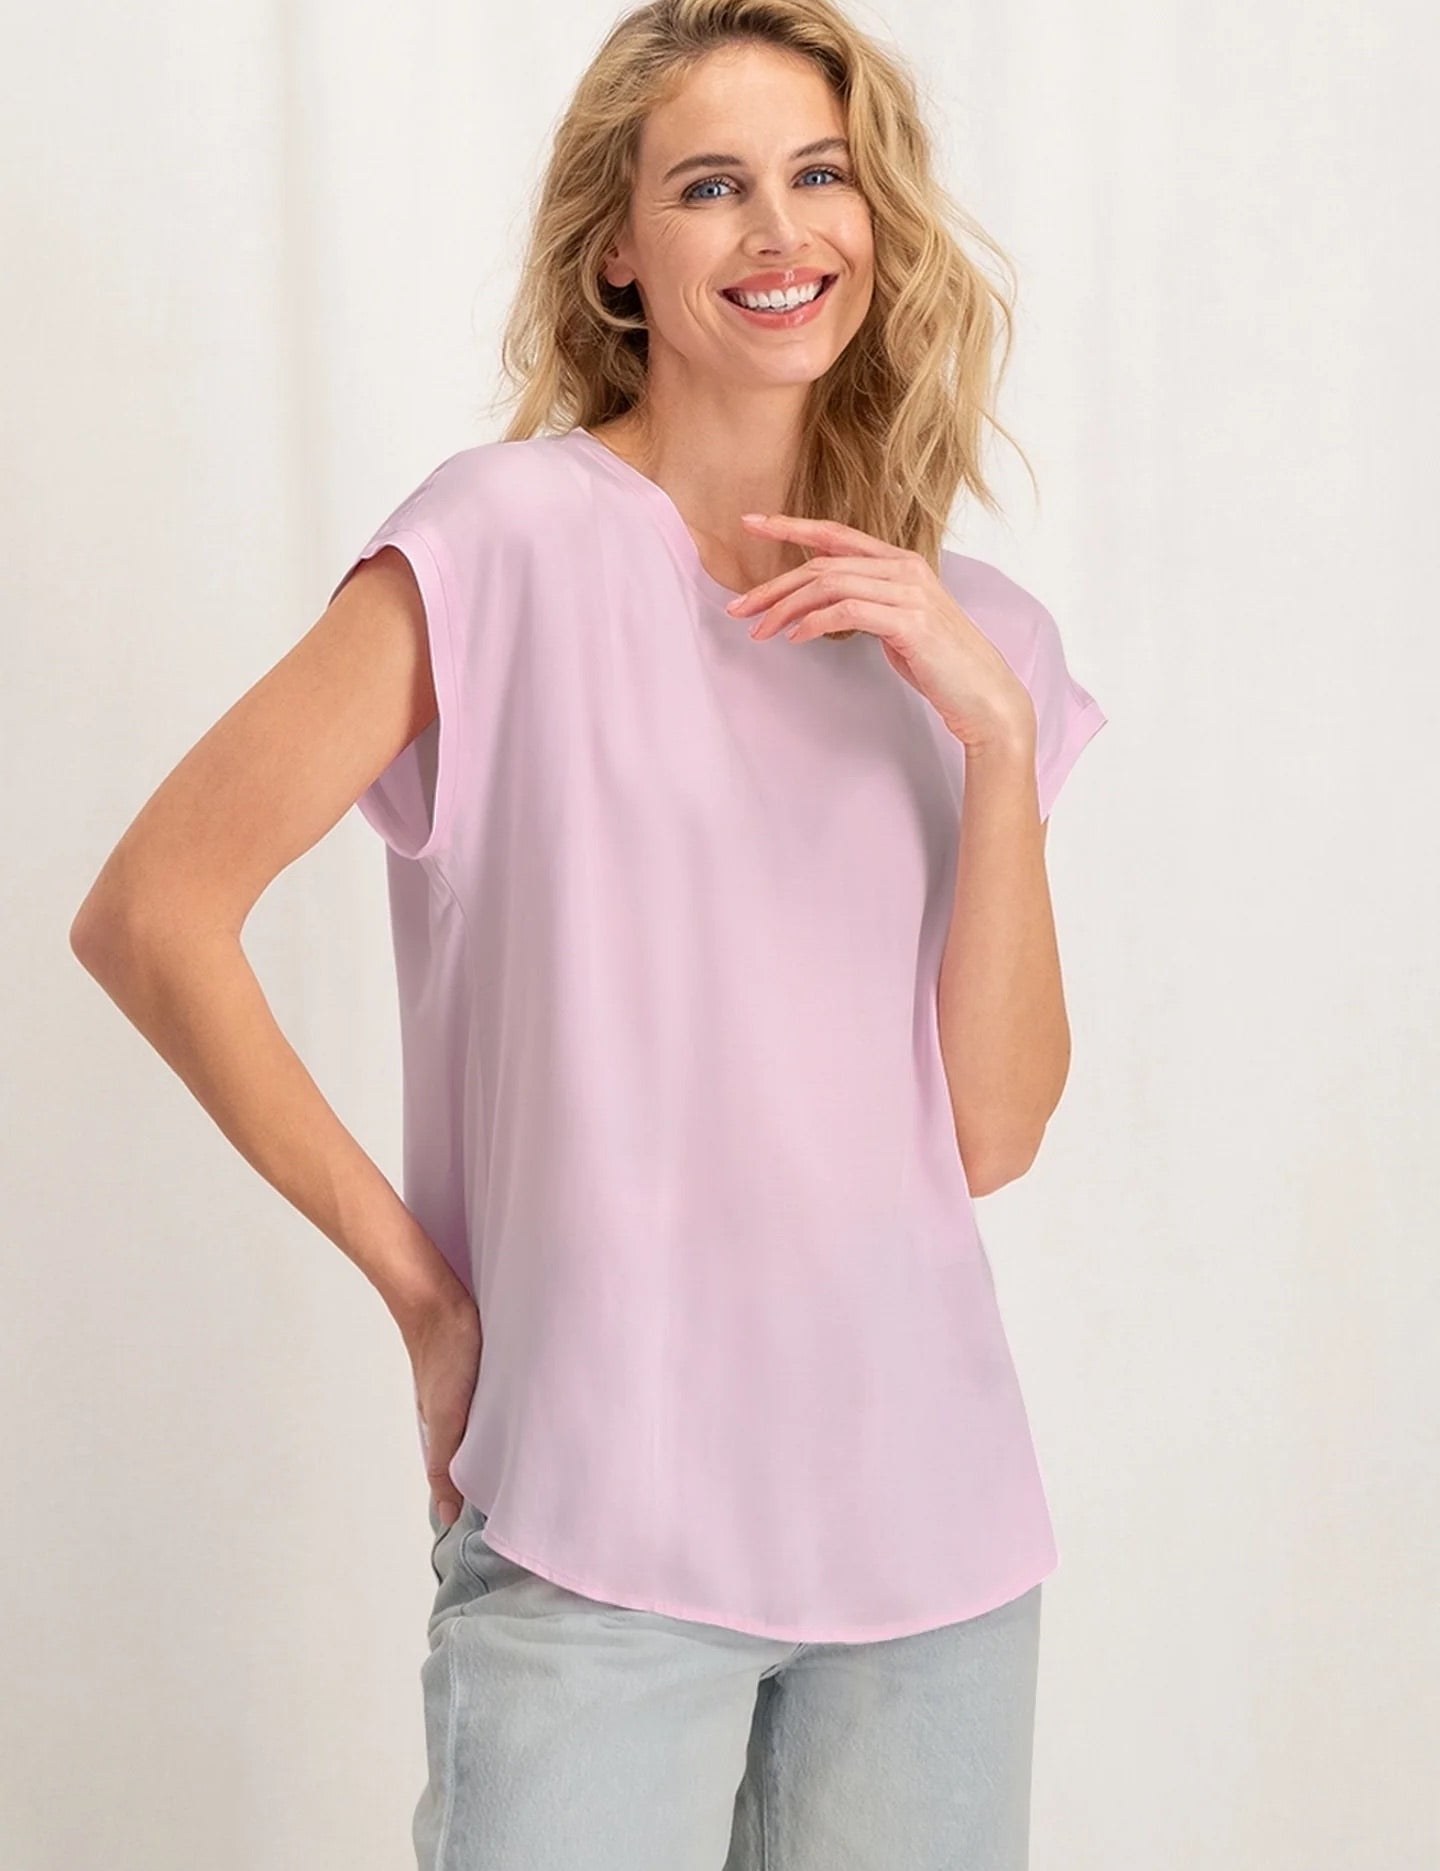 sleeveless-top-with-round-neck-in-fabrix-mix-lady-pink_2880x_jpg.jpg